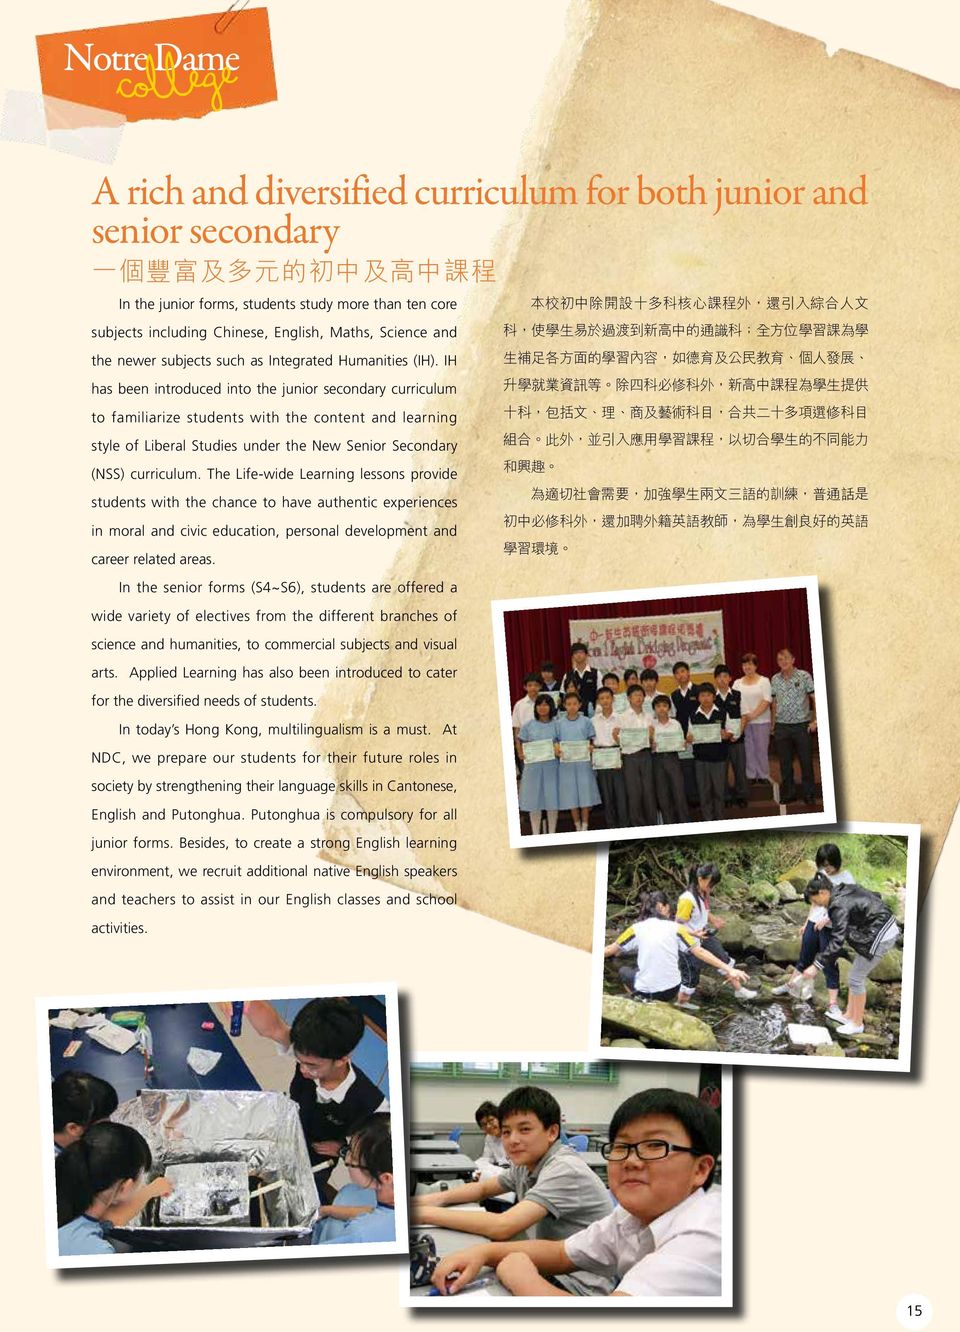 IH has been introduced into the junior secondary curriculum to familiarize students with the content and learning style of Liberal Studies under the New Senior Secondary (NSS) curriculum.